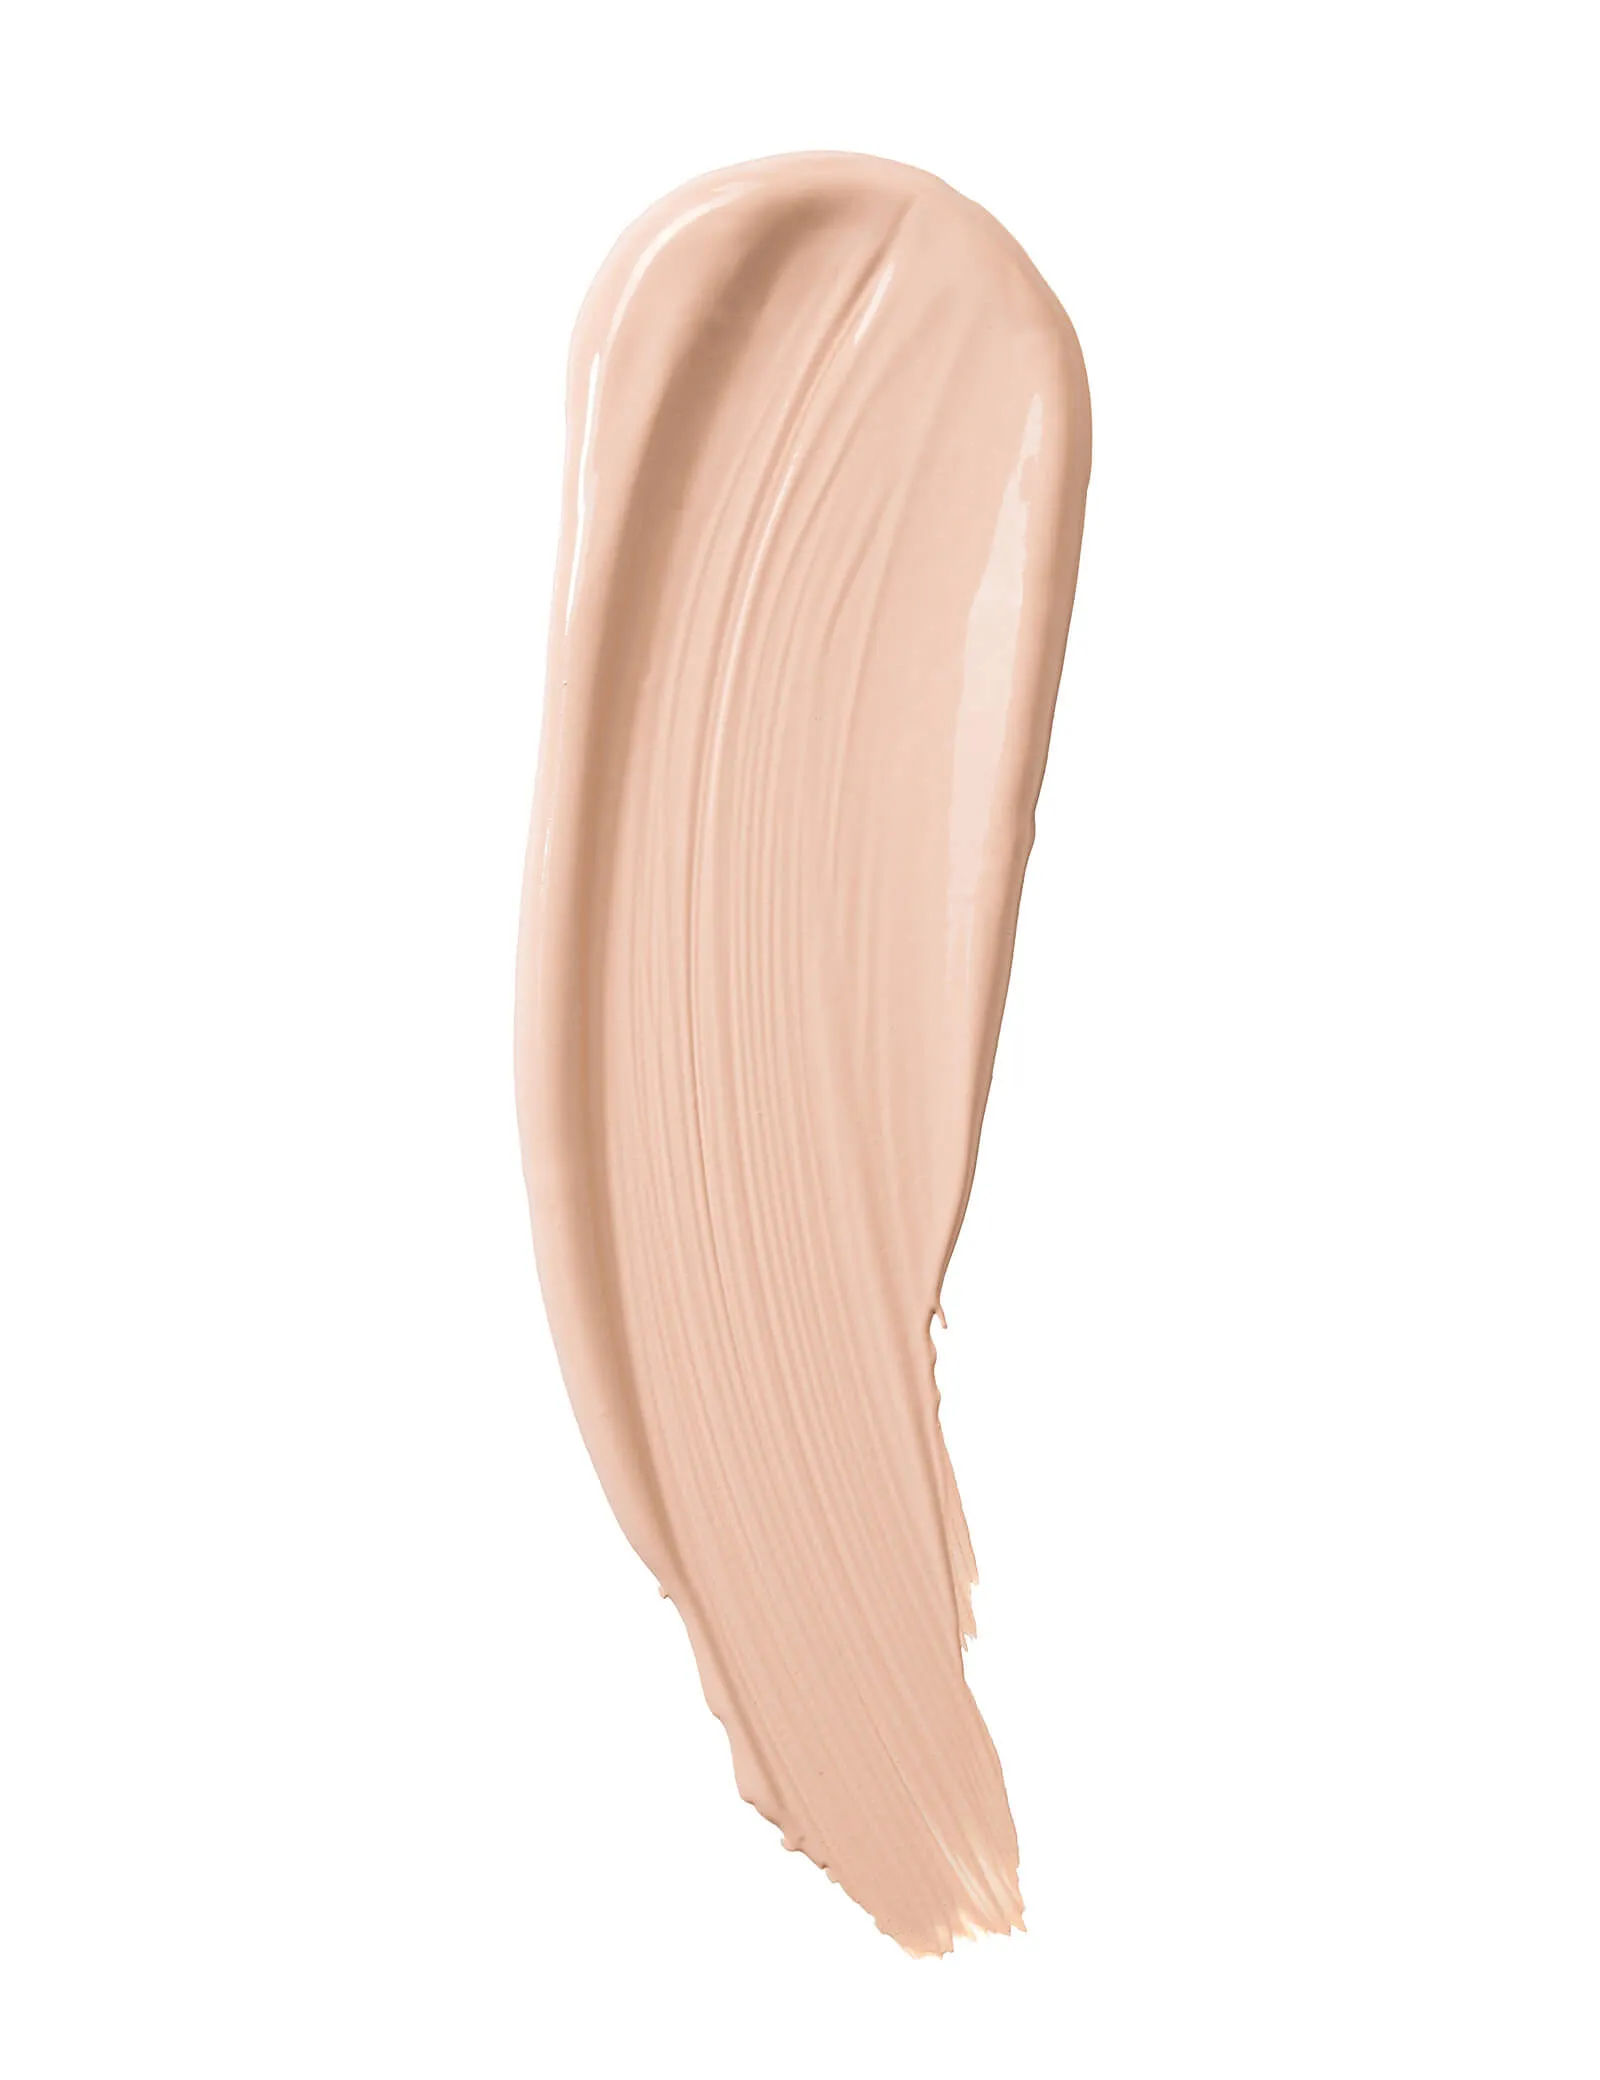 FLORMAR PERFECT COVERAGE FOUNDATION - 30ml SPF15